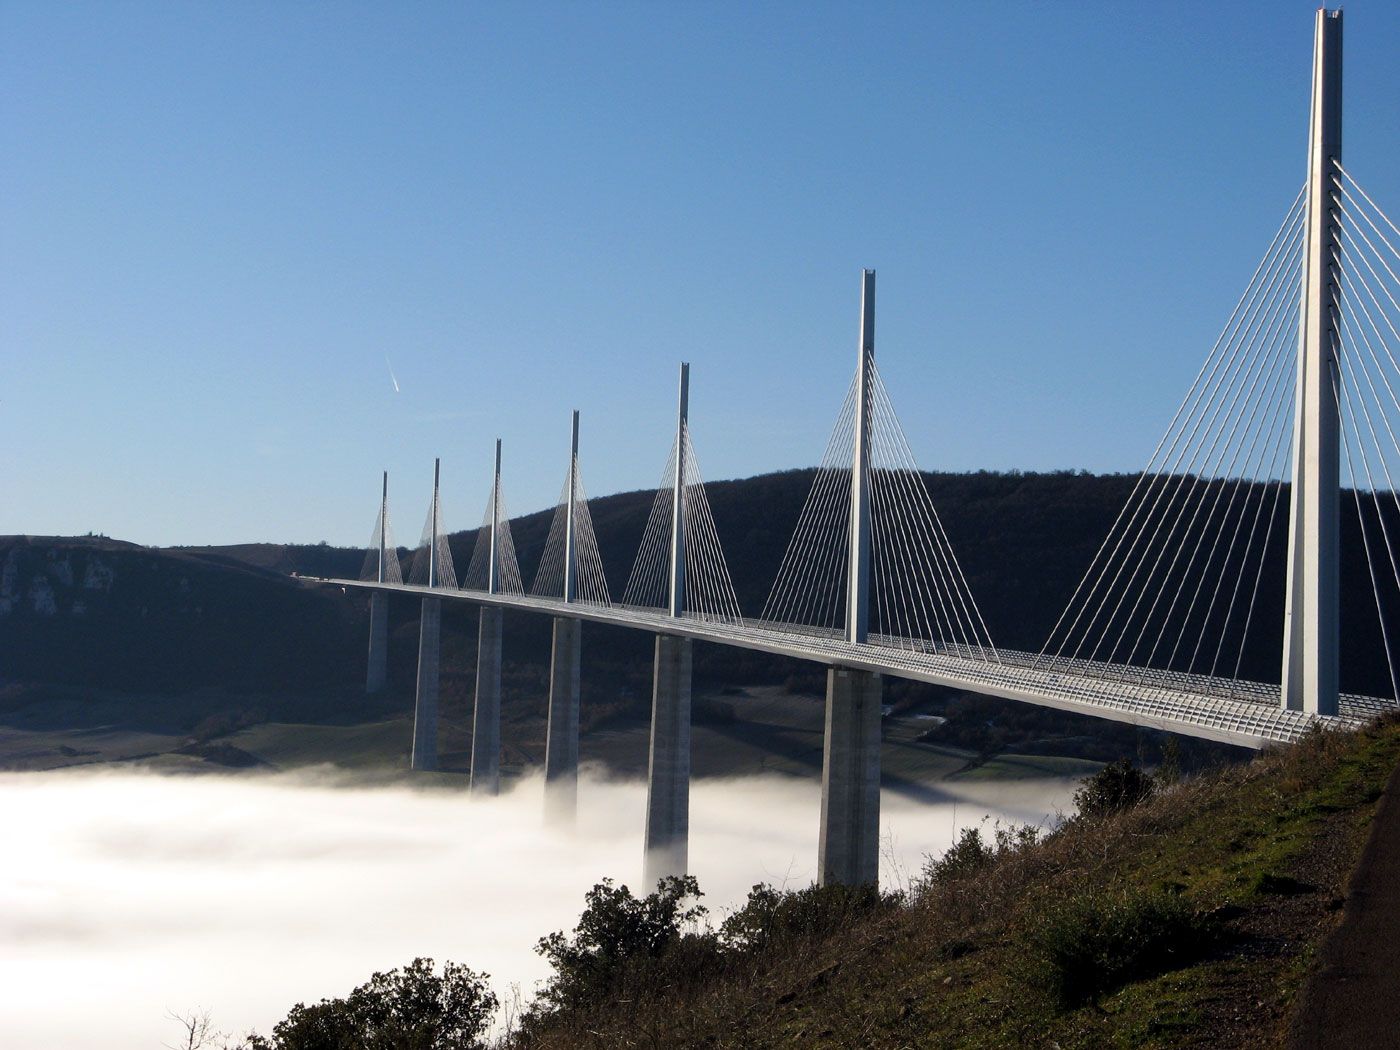 Millau Viaduct Pictures wallpaper | 1400x1050 | #15117